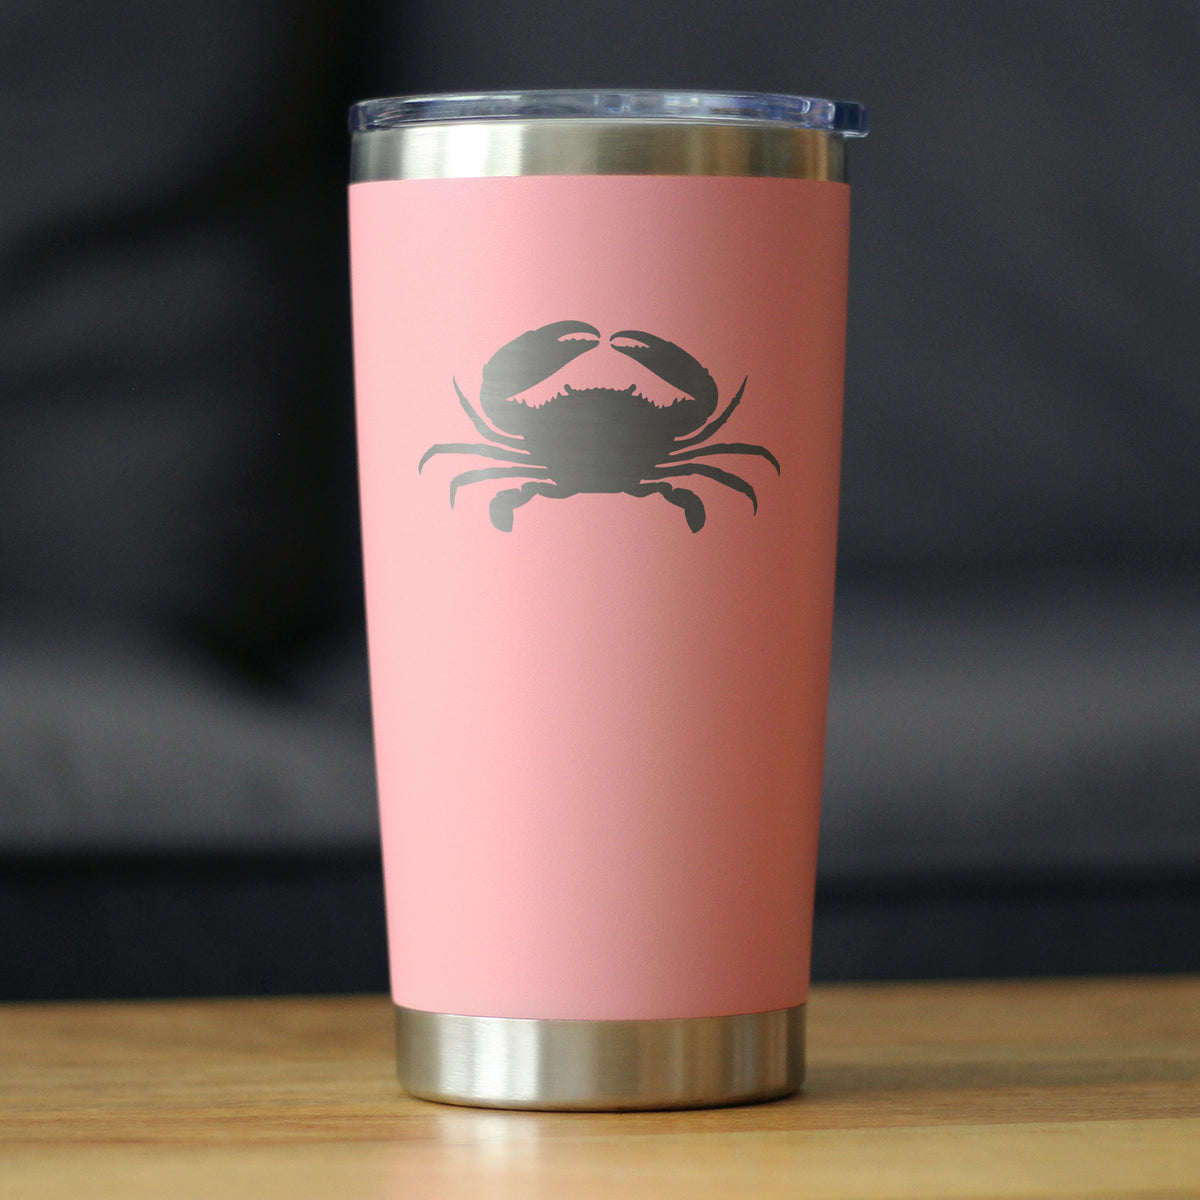 Crab Silhouette - Insulated Coffee Tumbler Cup with Sliding Lid - Stainless Steel Insulated Mug - Crab Gifts and Decor for Women and Men